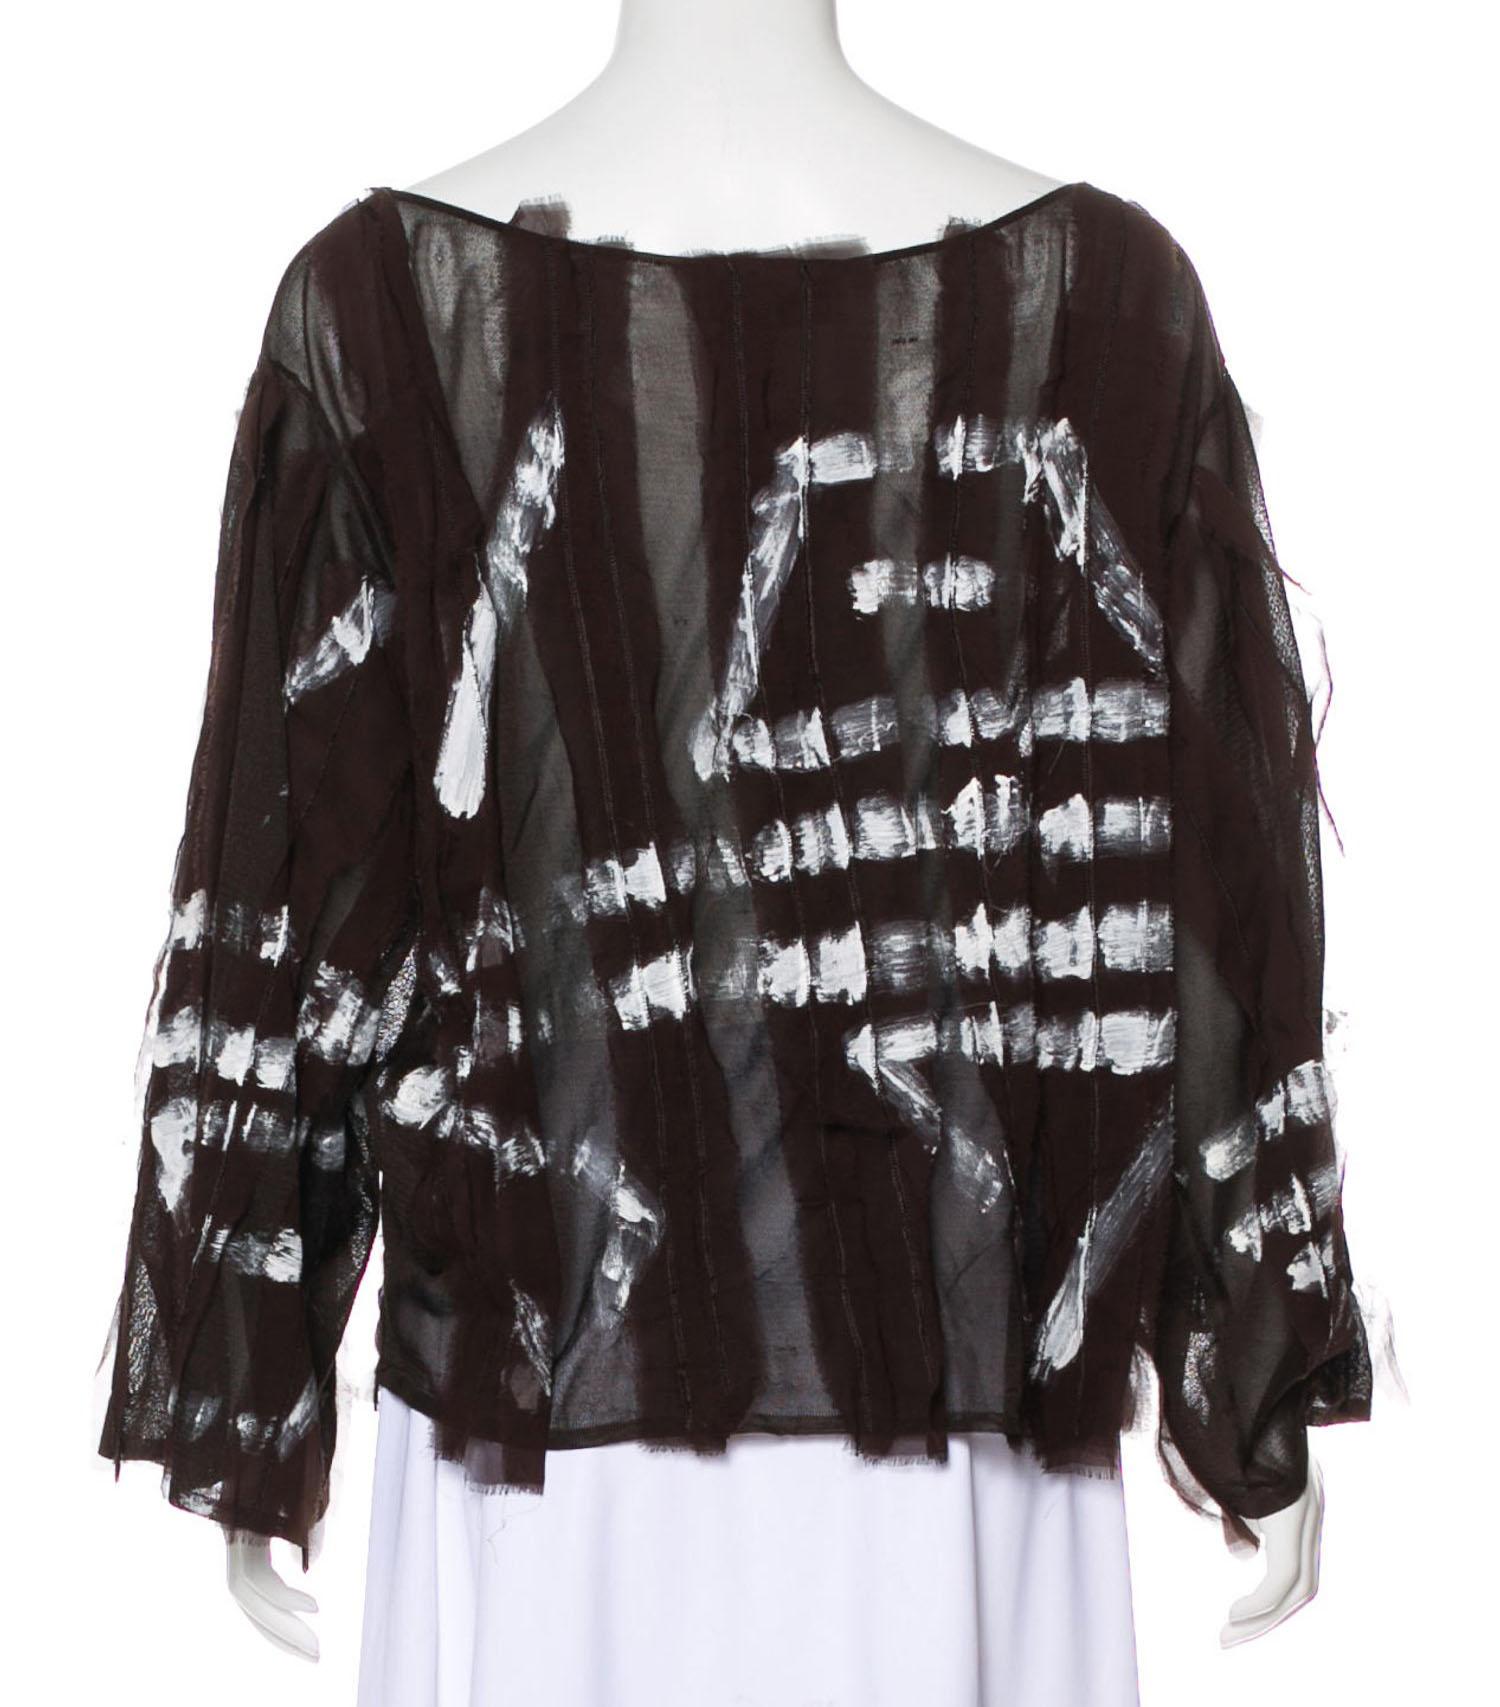 Tom Ford for Yves Saint Laurent Hand Painted Semi-Sheer Silk Top, S / S 2002  In Excellent Condition For Sale In Montgomery, TX